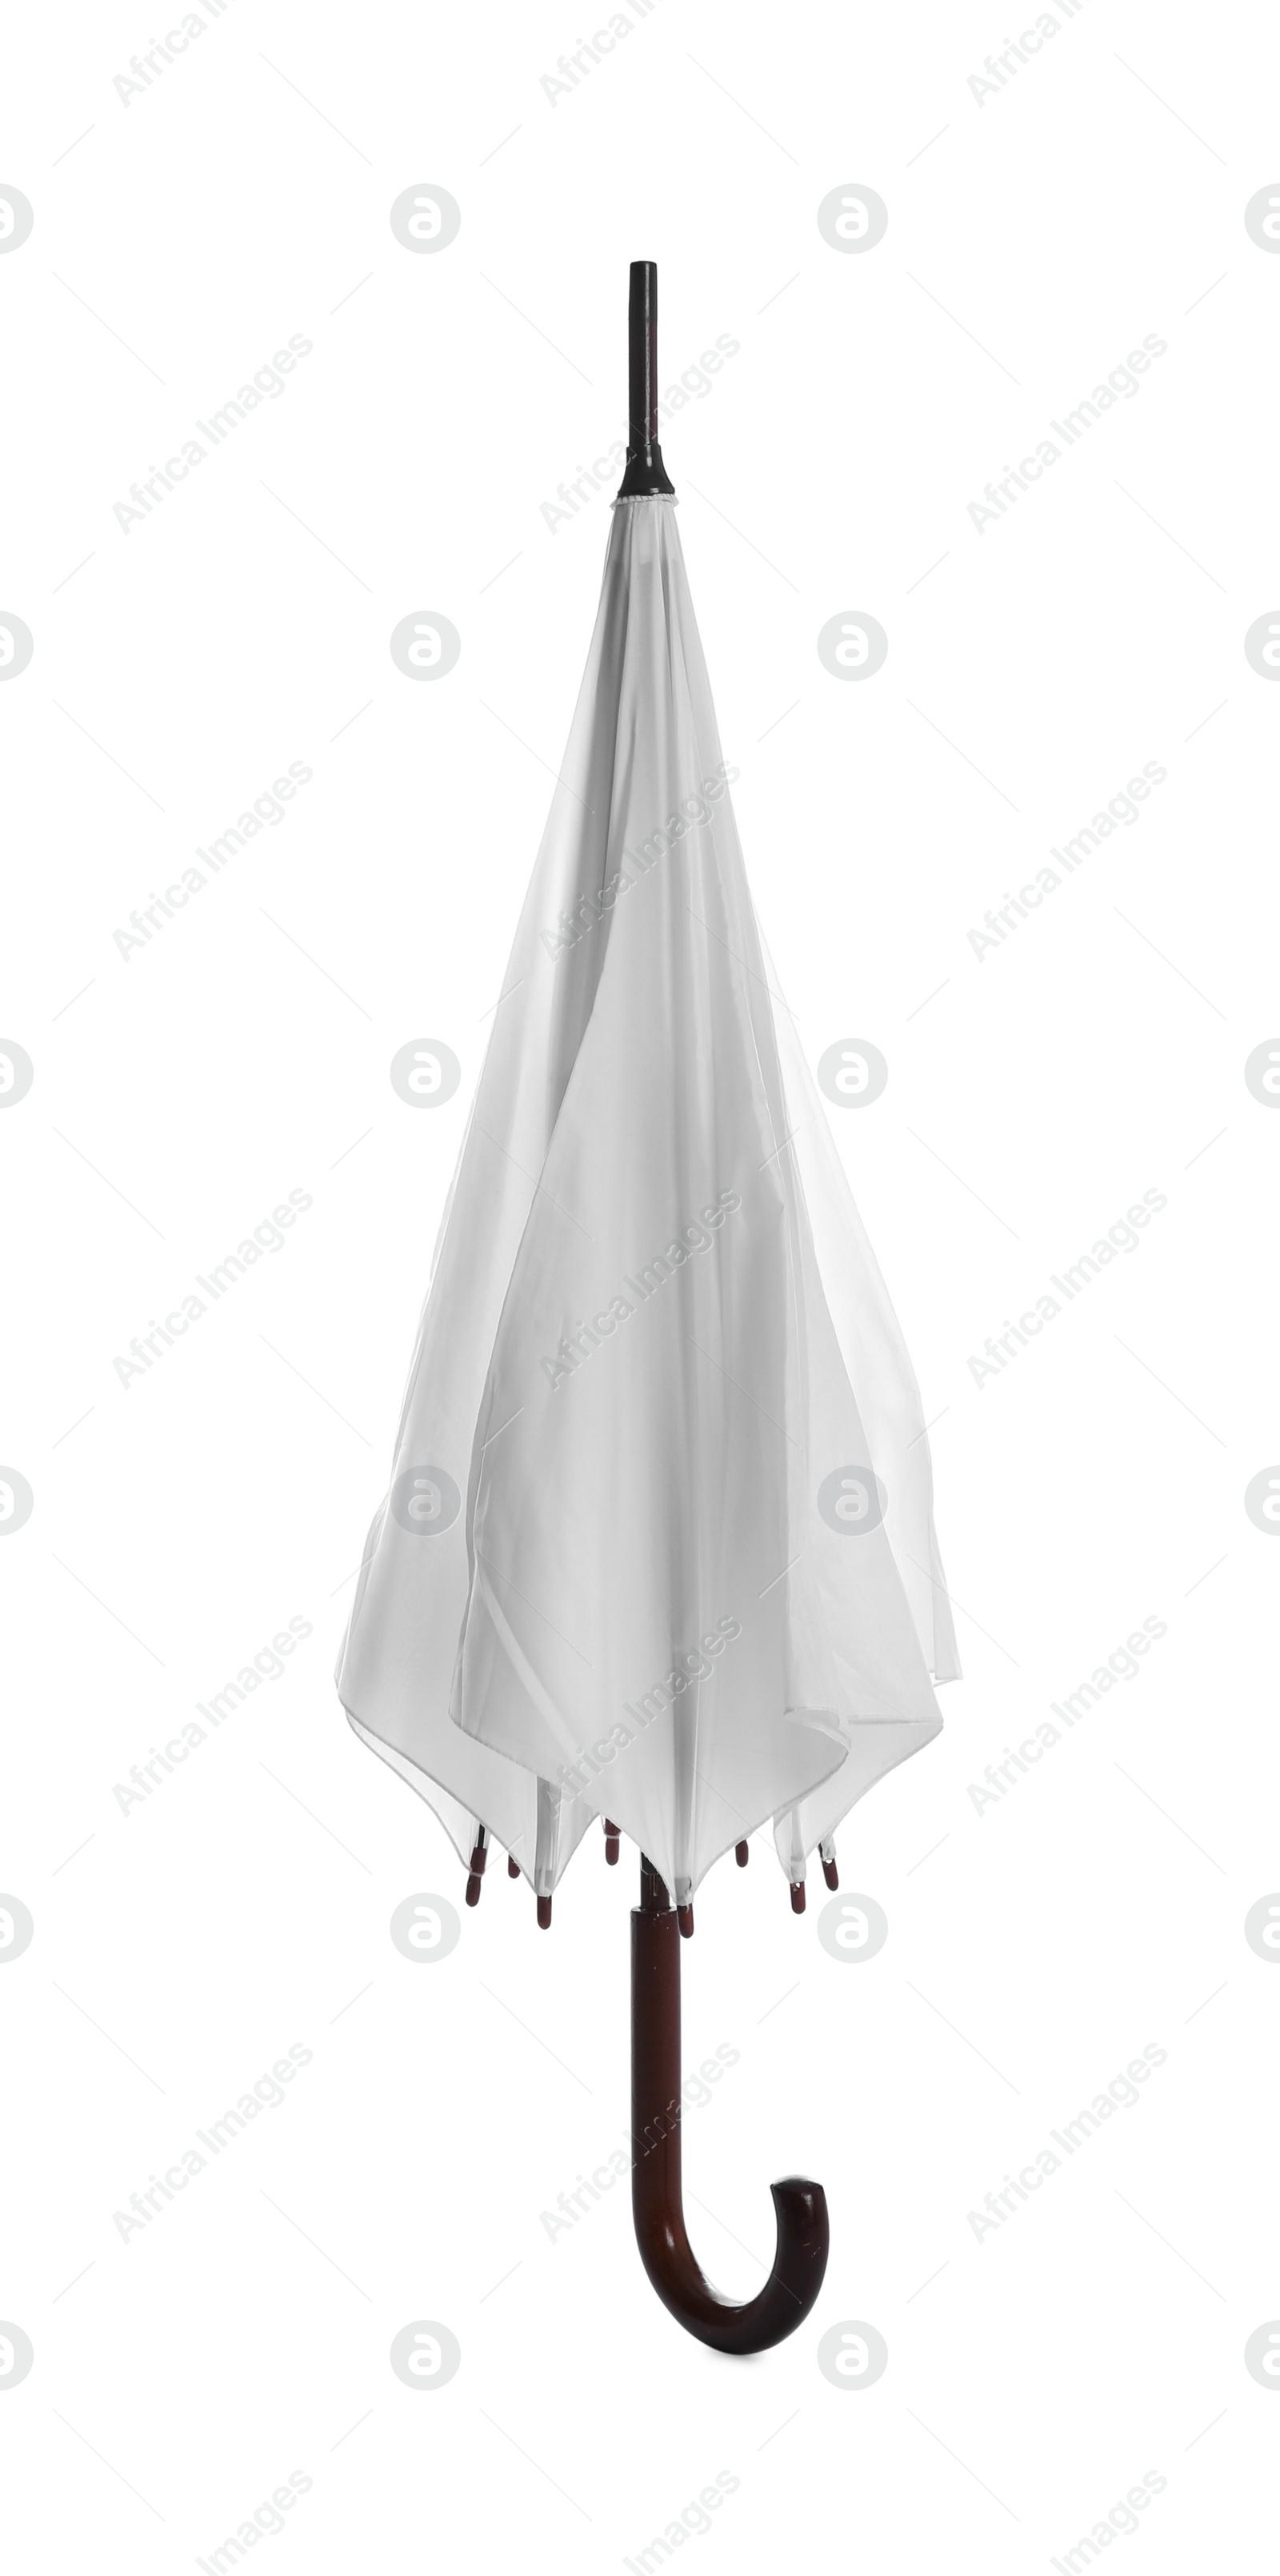 Photo of One closed straight umbrella isolated on white